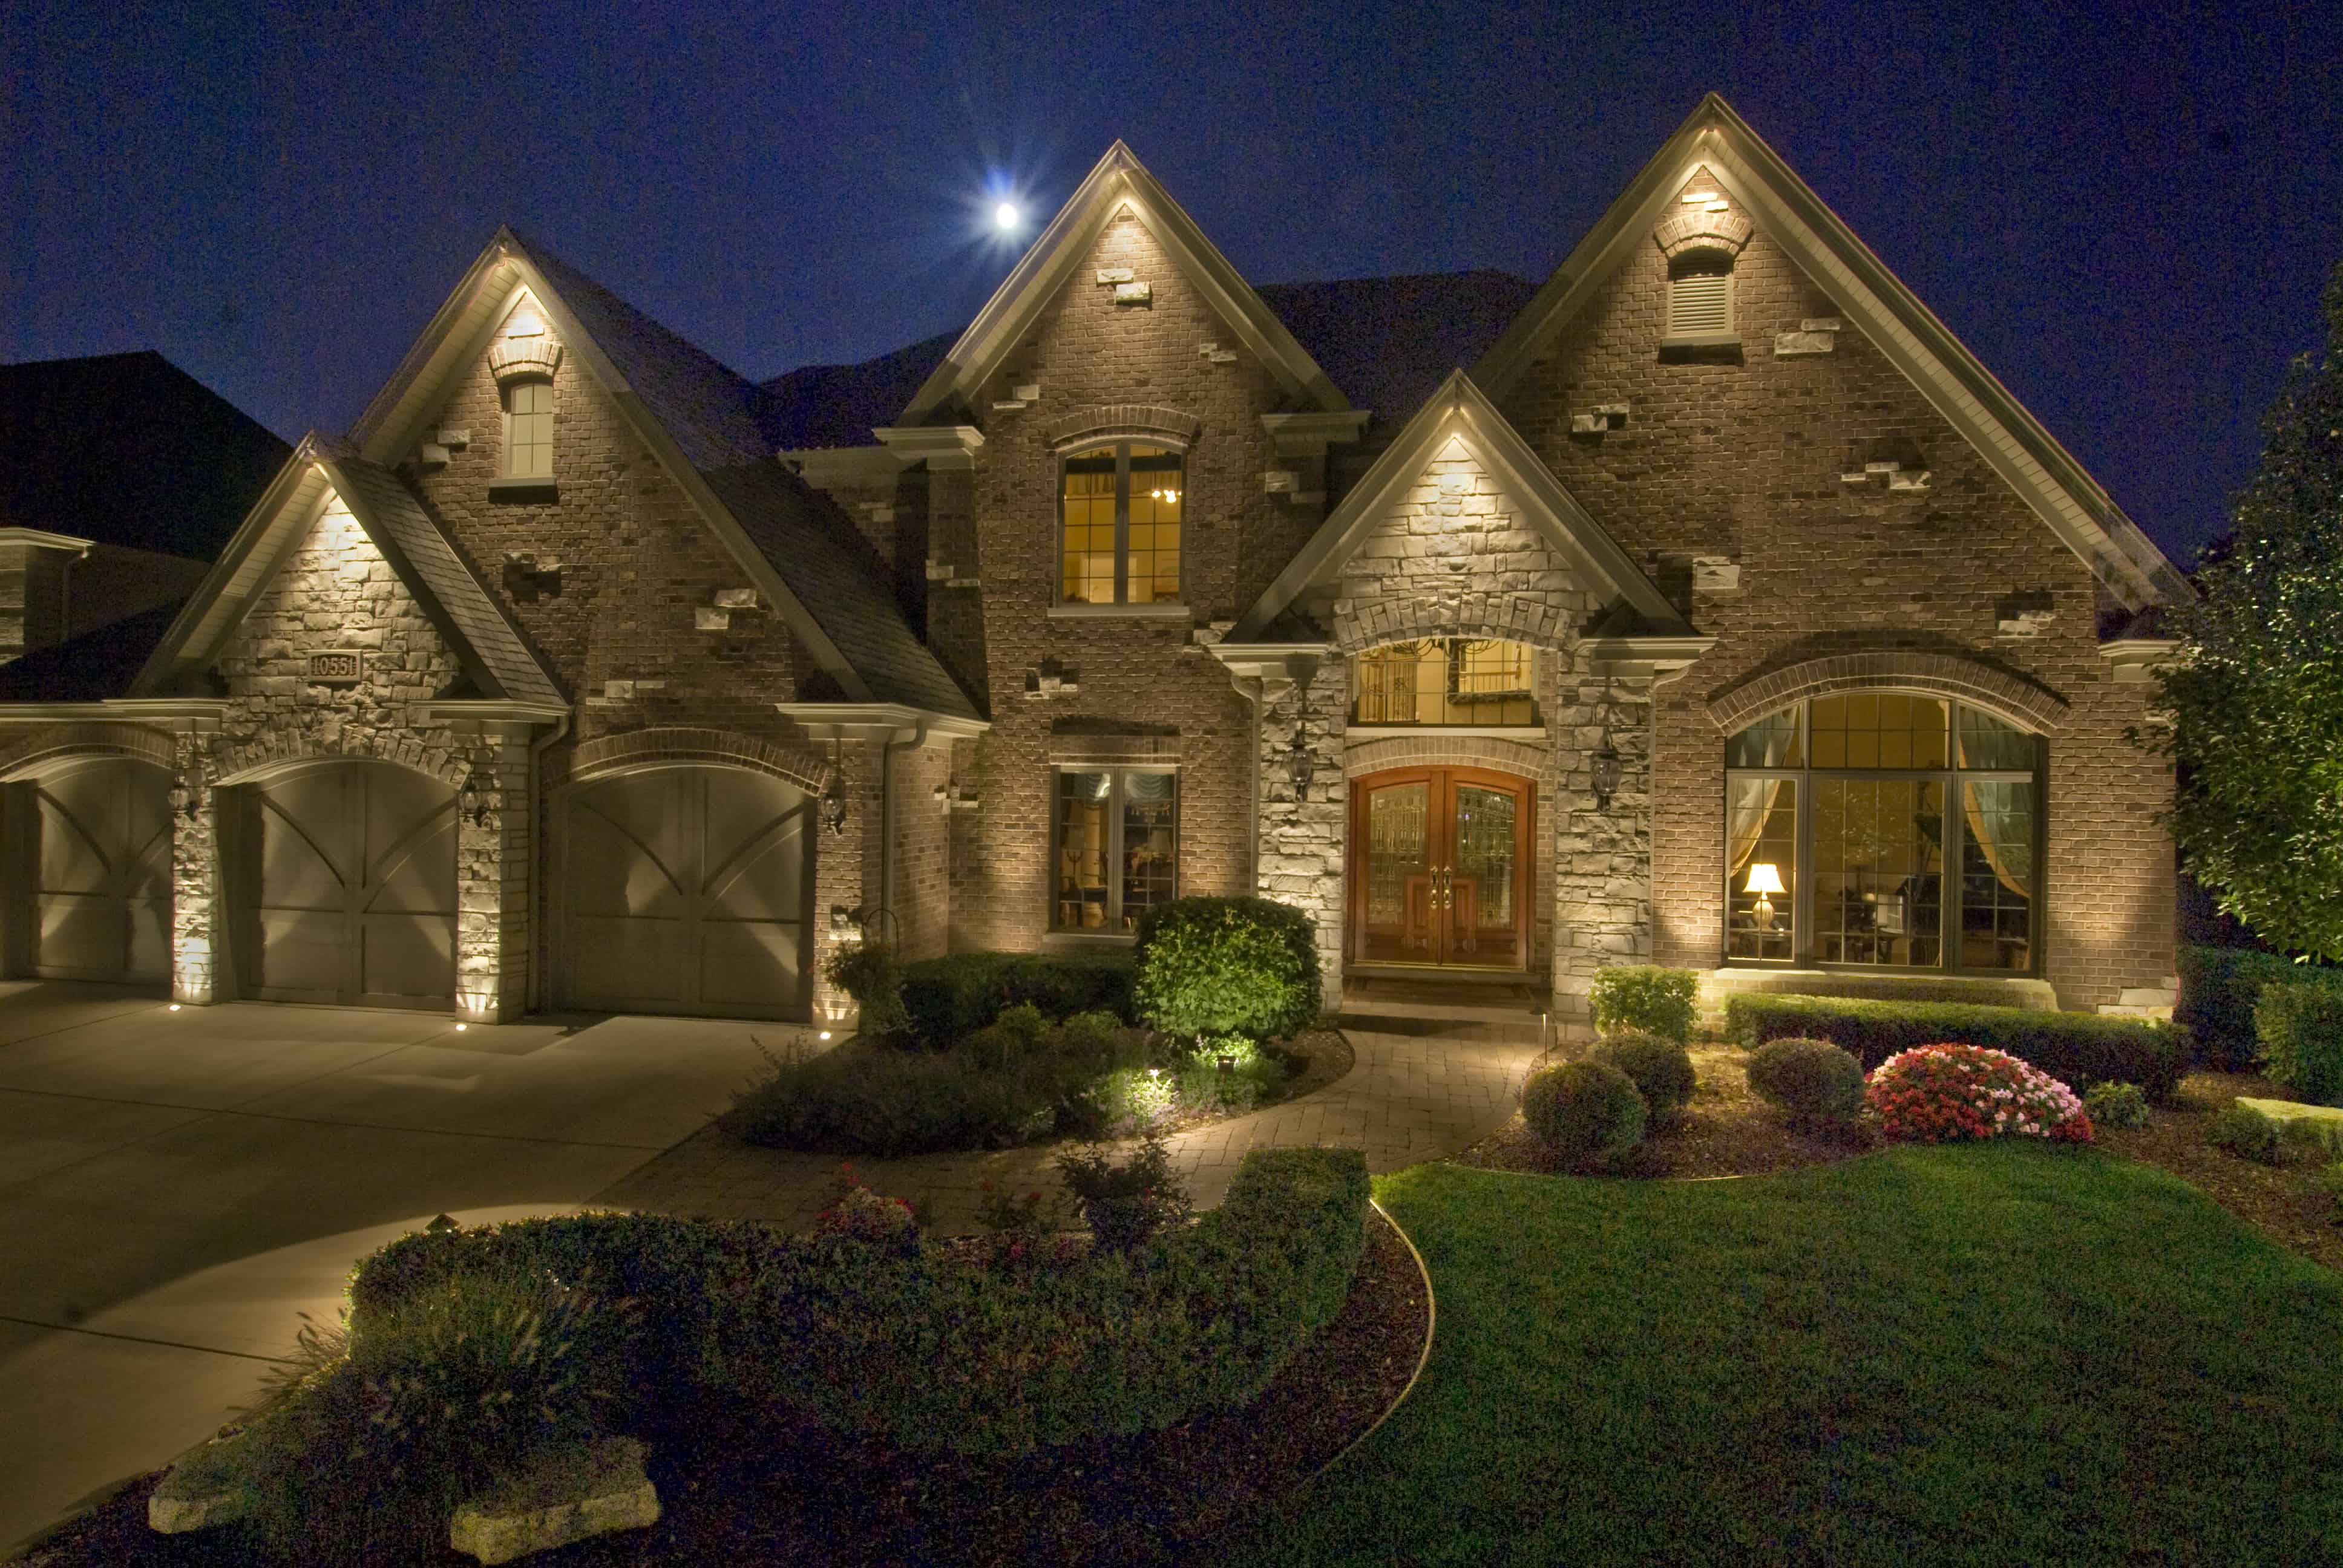 Orland Park Residential Lighting - Outdoor Lighting in Chicago, IL